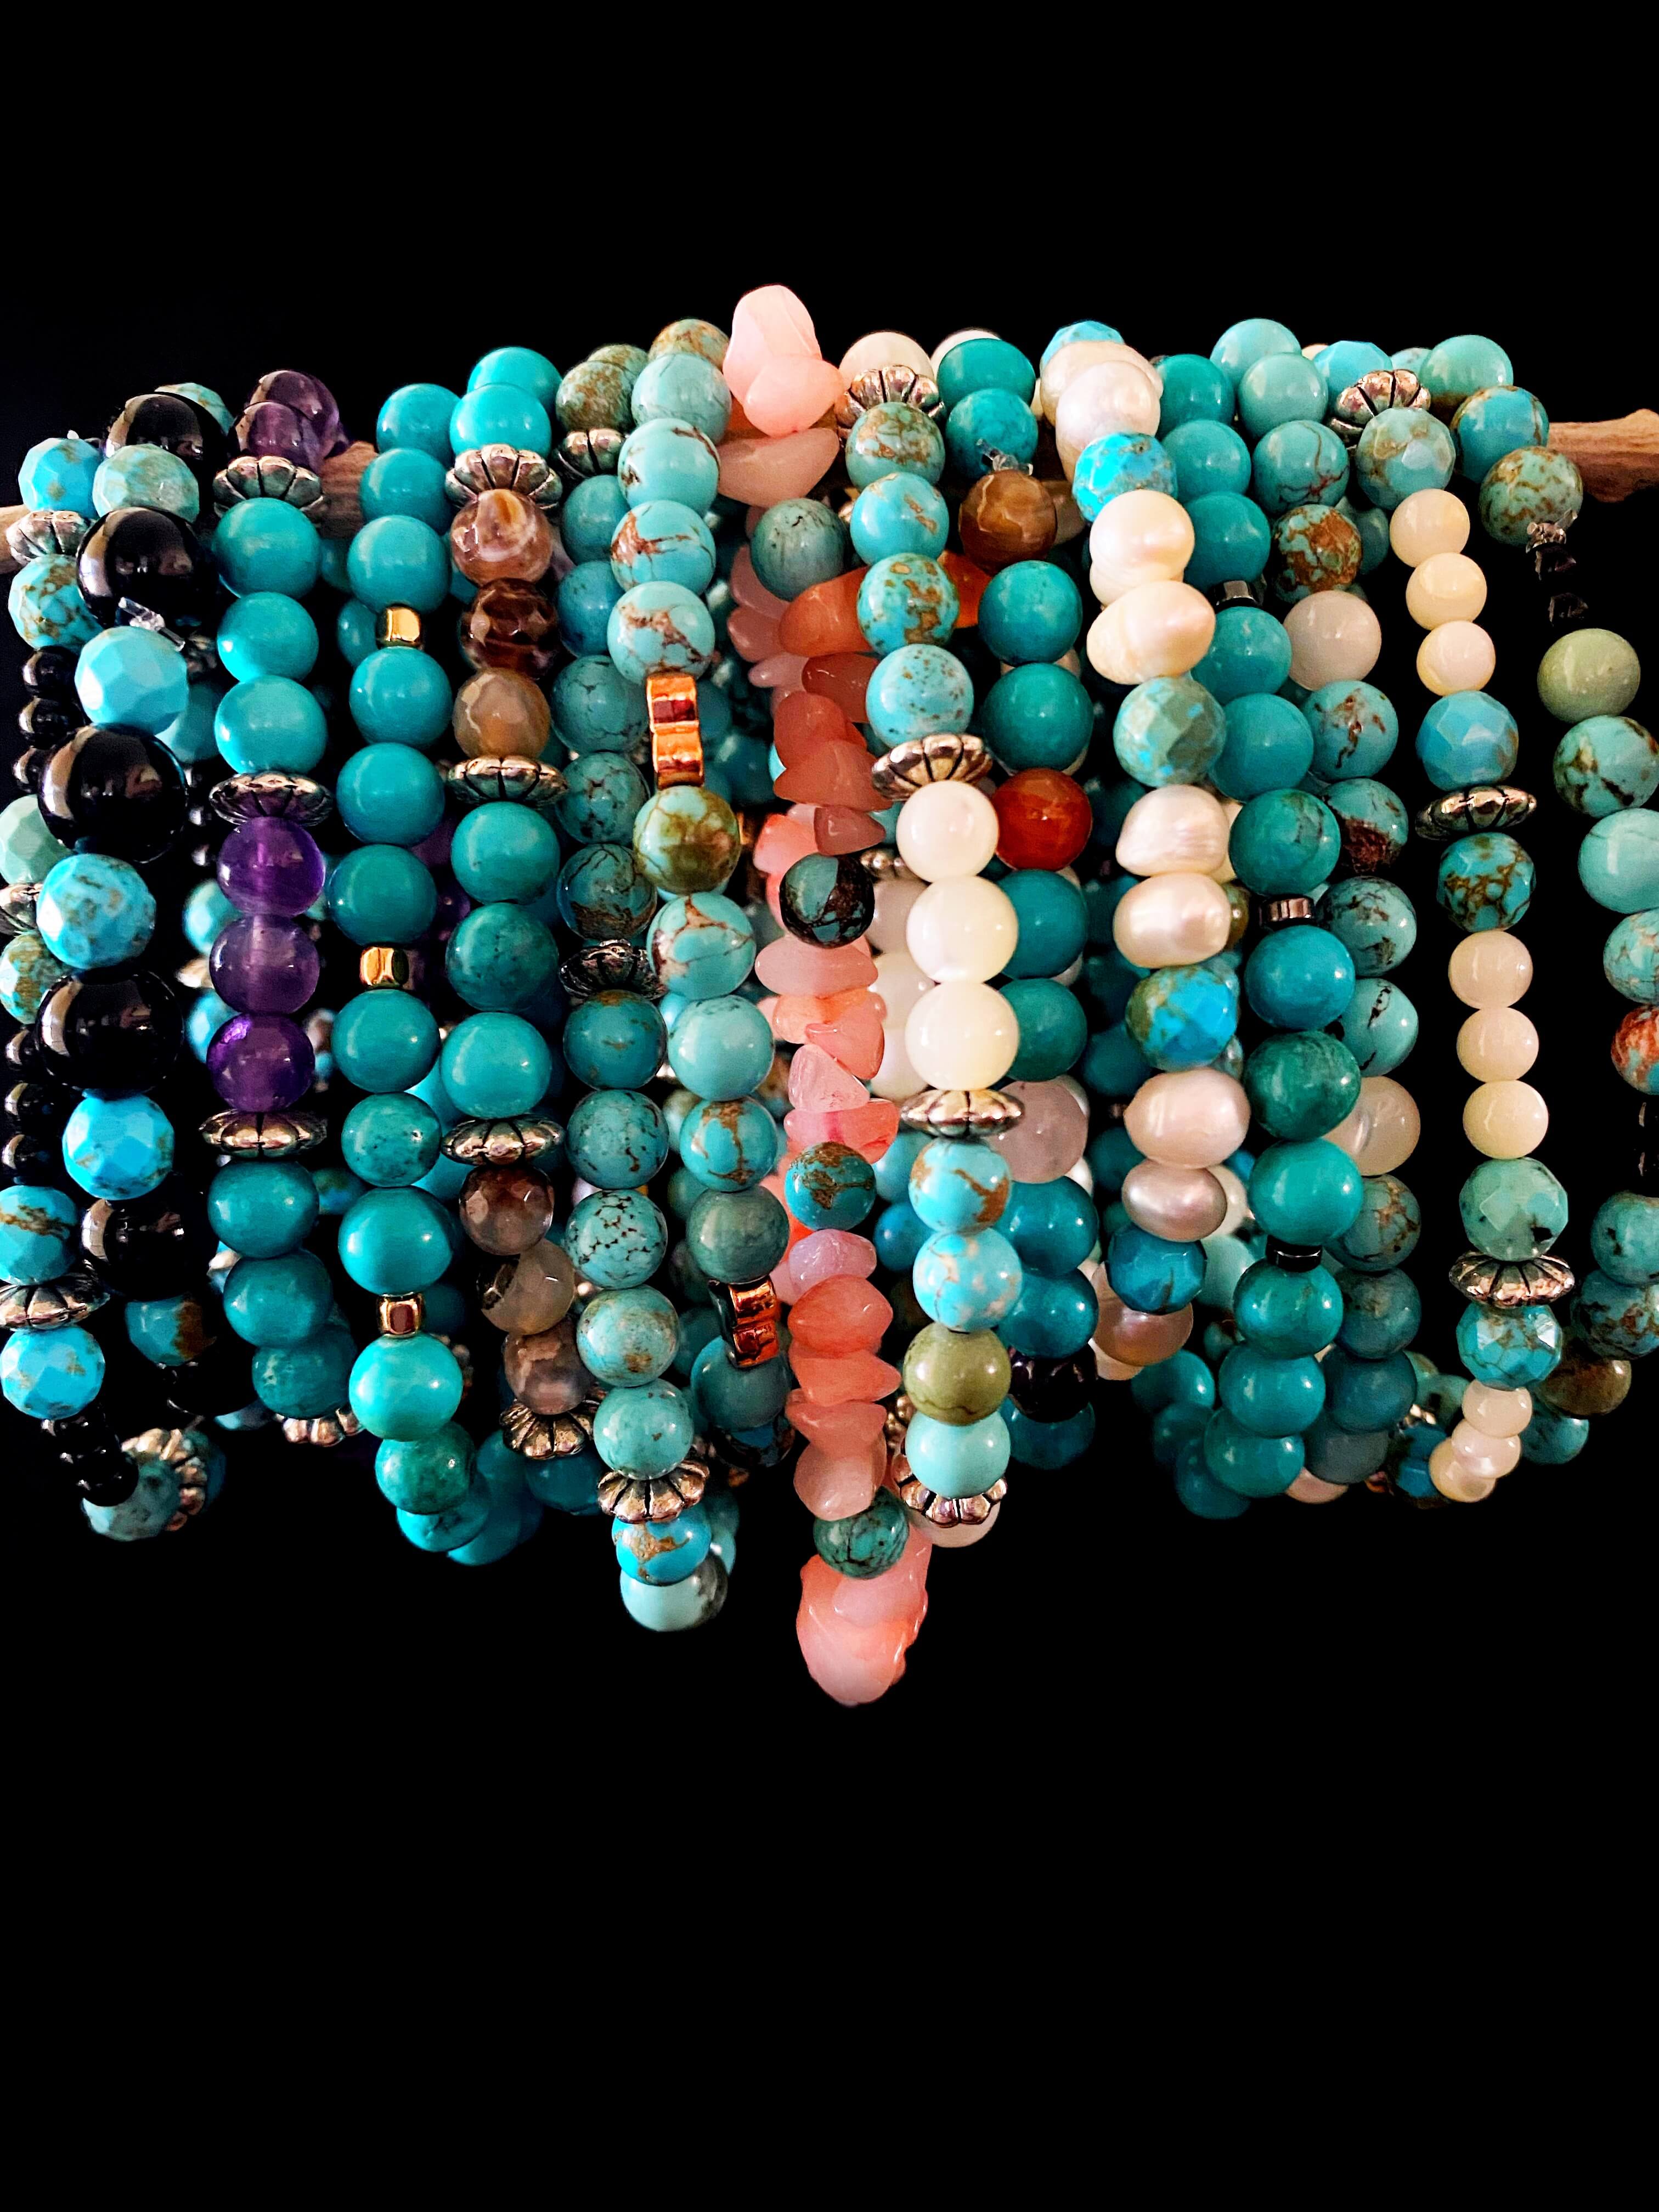 These gorgeous bracelets have been so popular with our customers